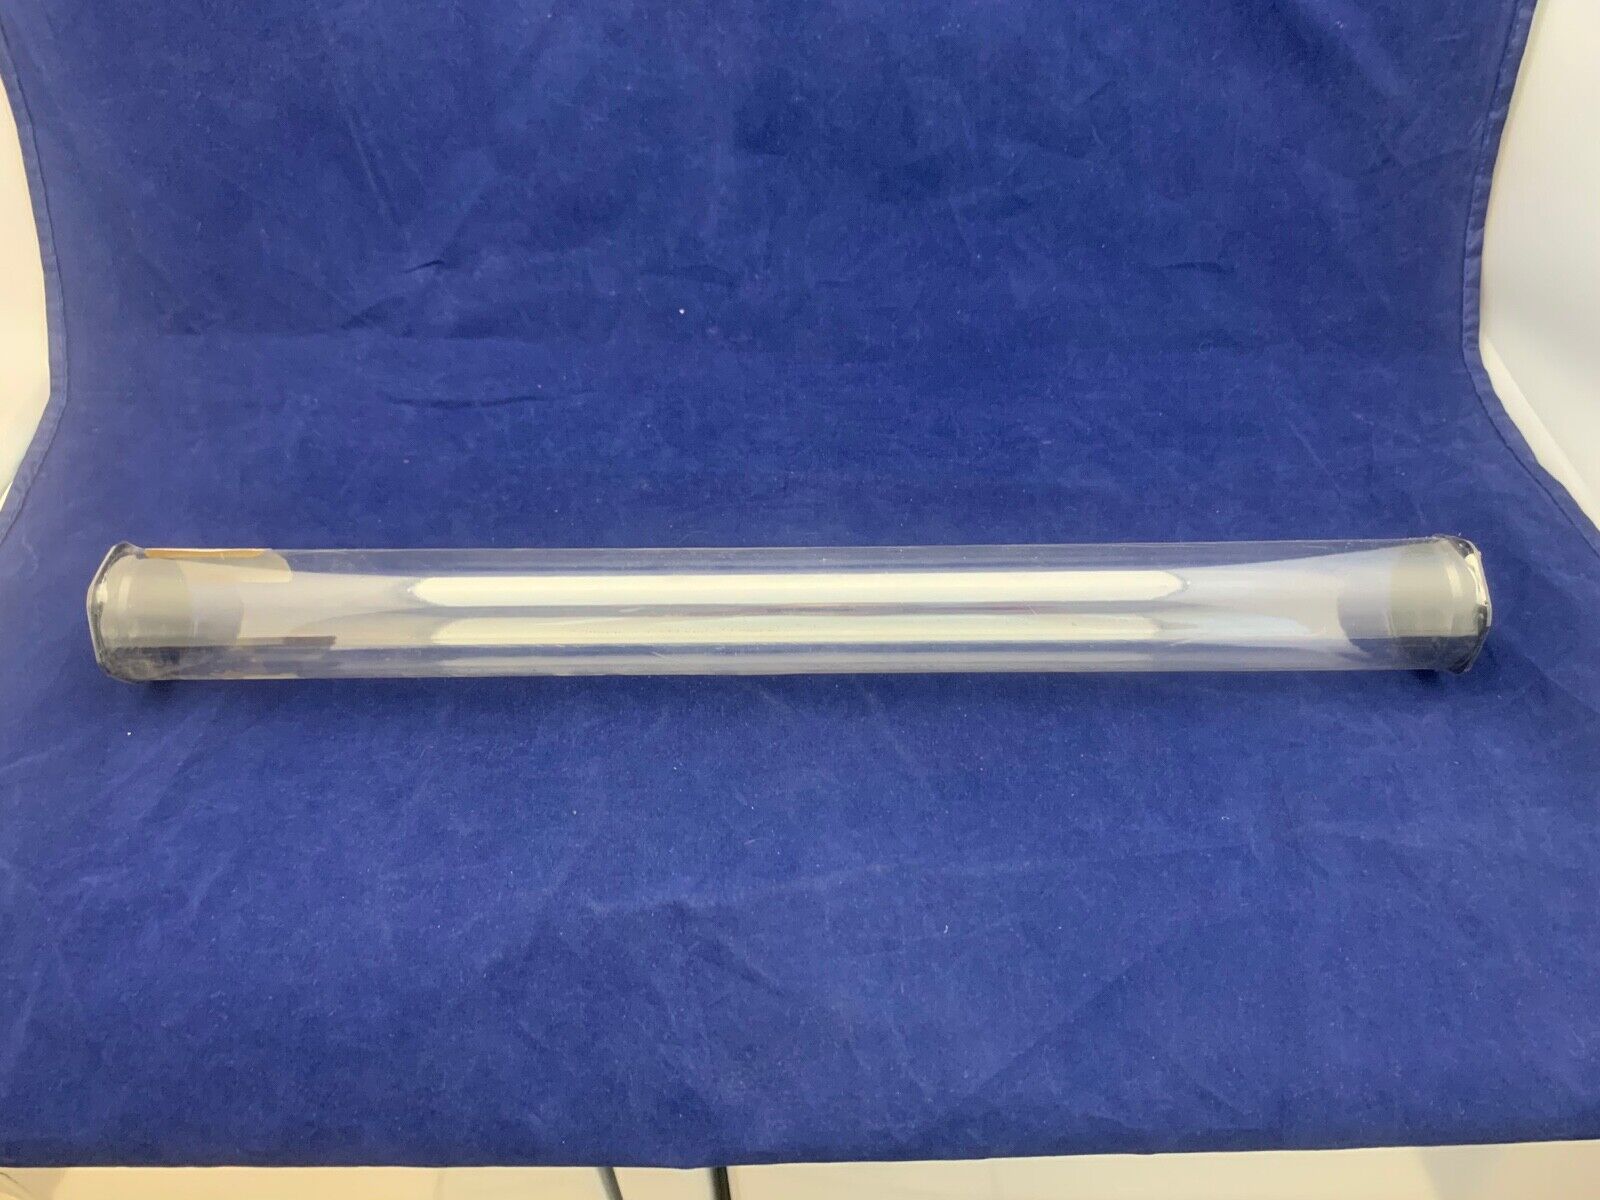 Rawlings 17 inch Mini Bat Holder Tube Excellent Condition still has Plastic Seal